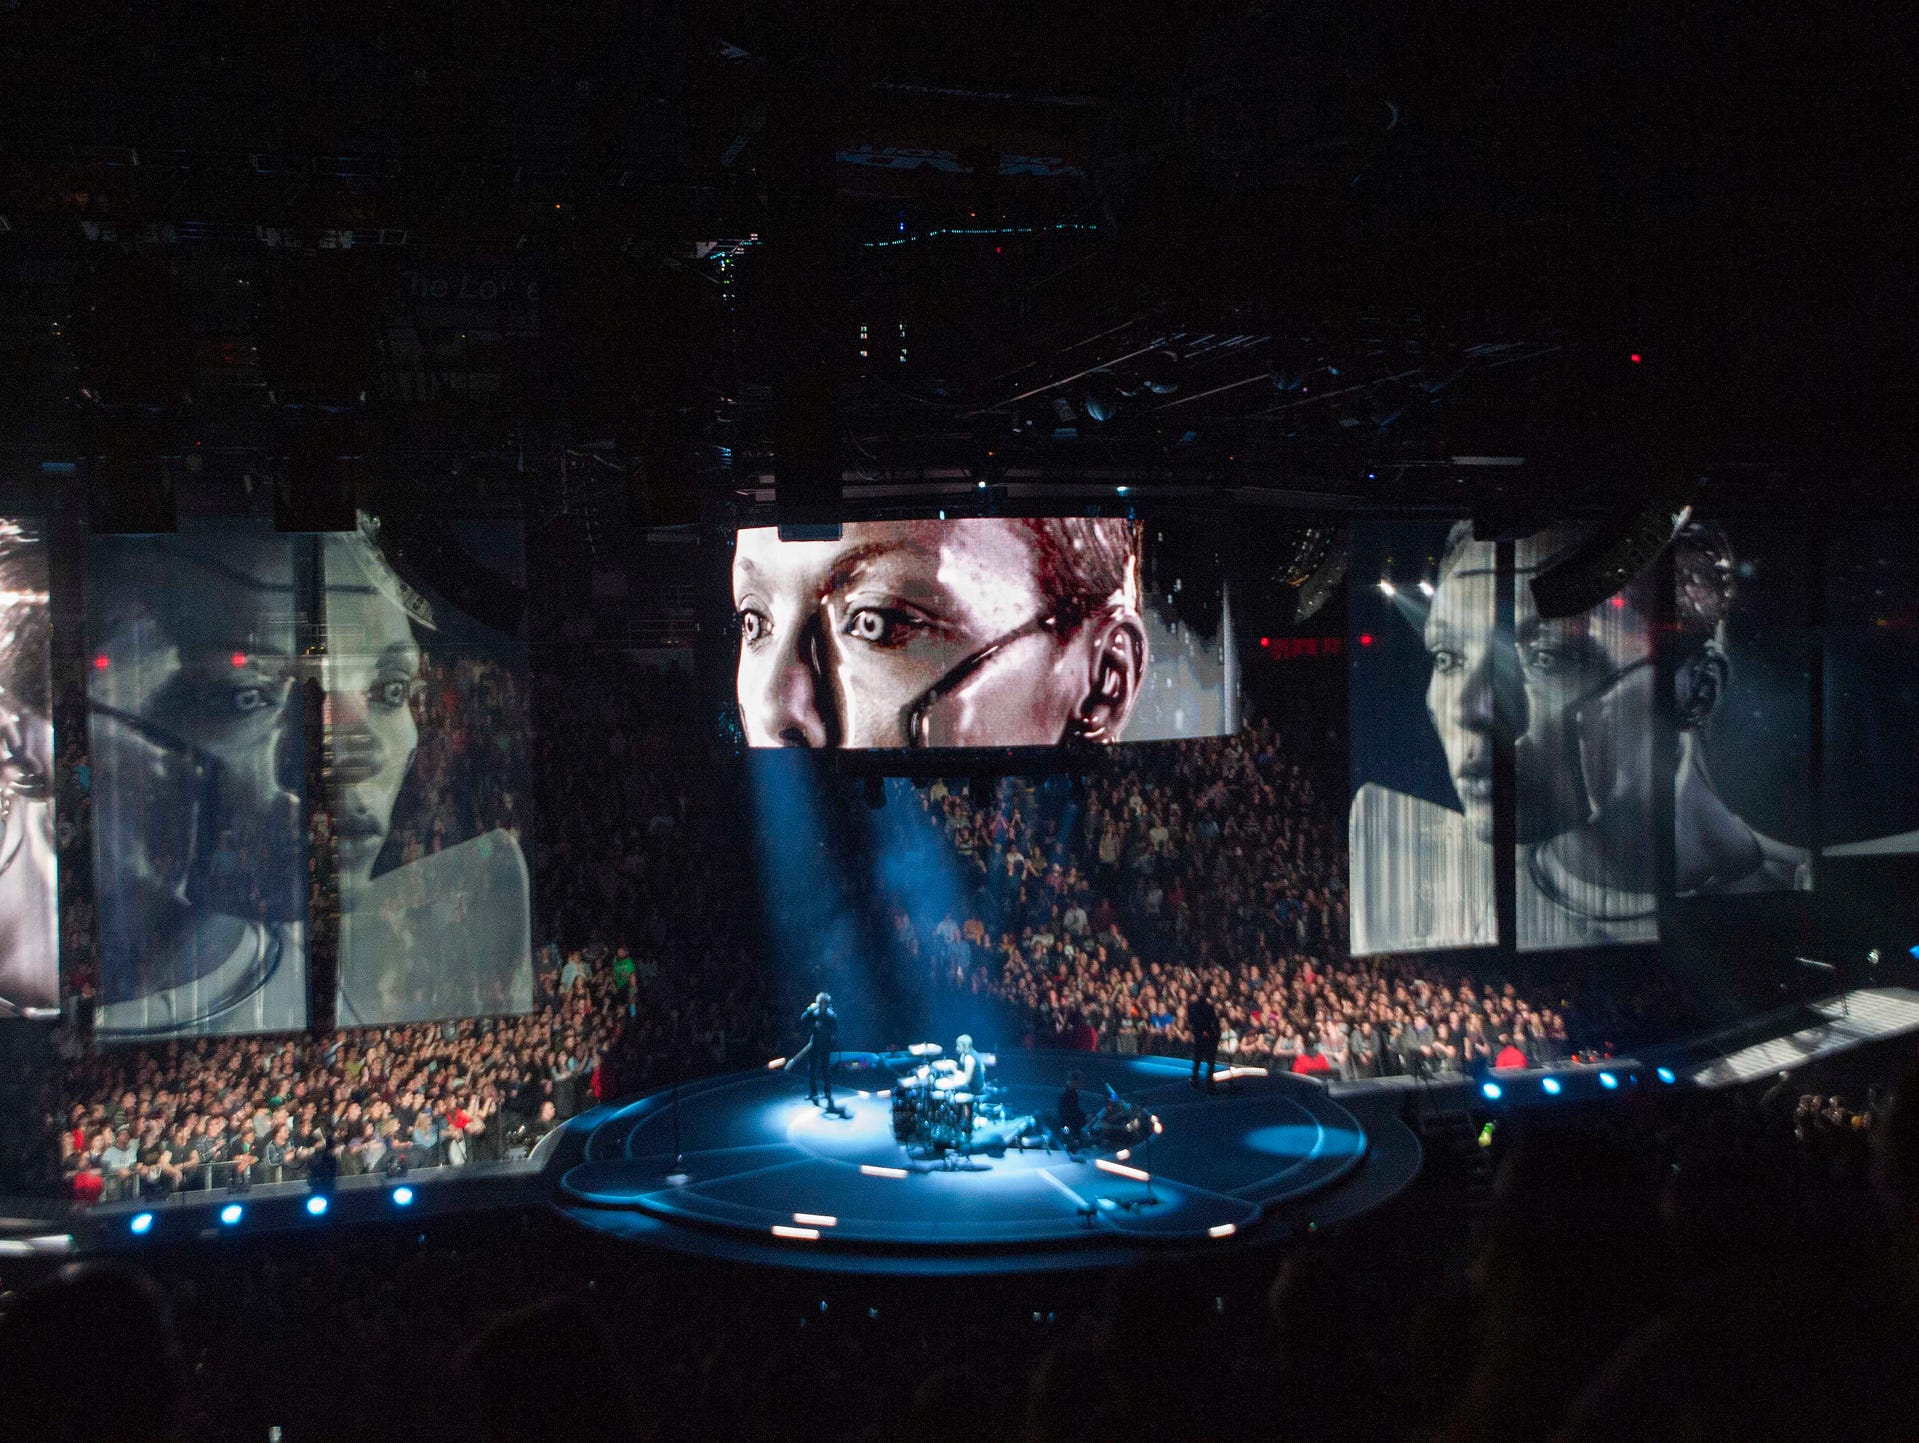 Muse performs on a circular stage in the middle of